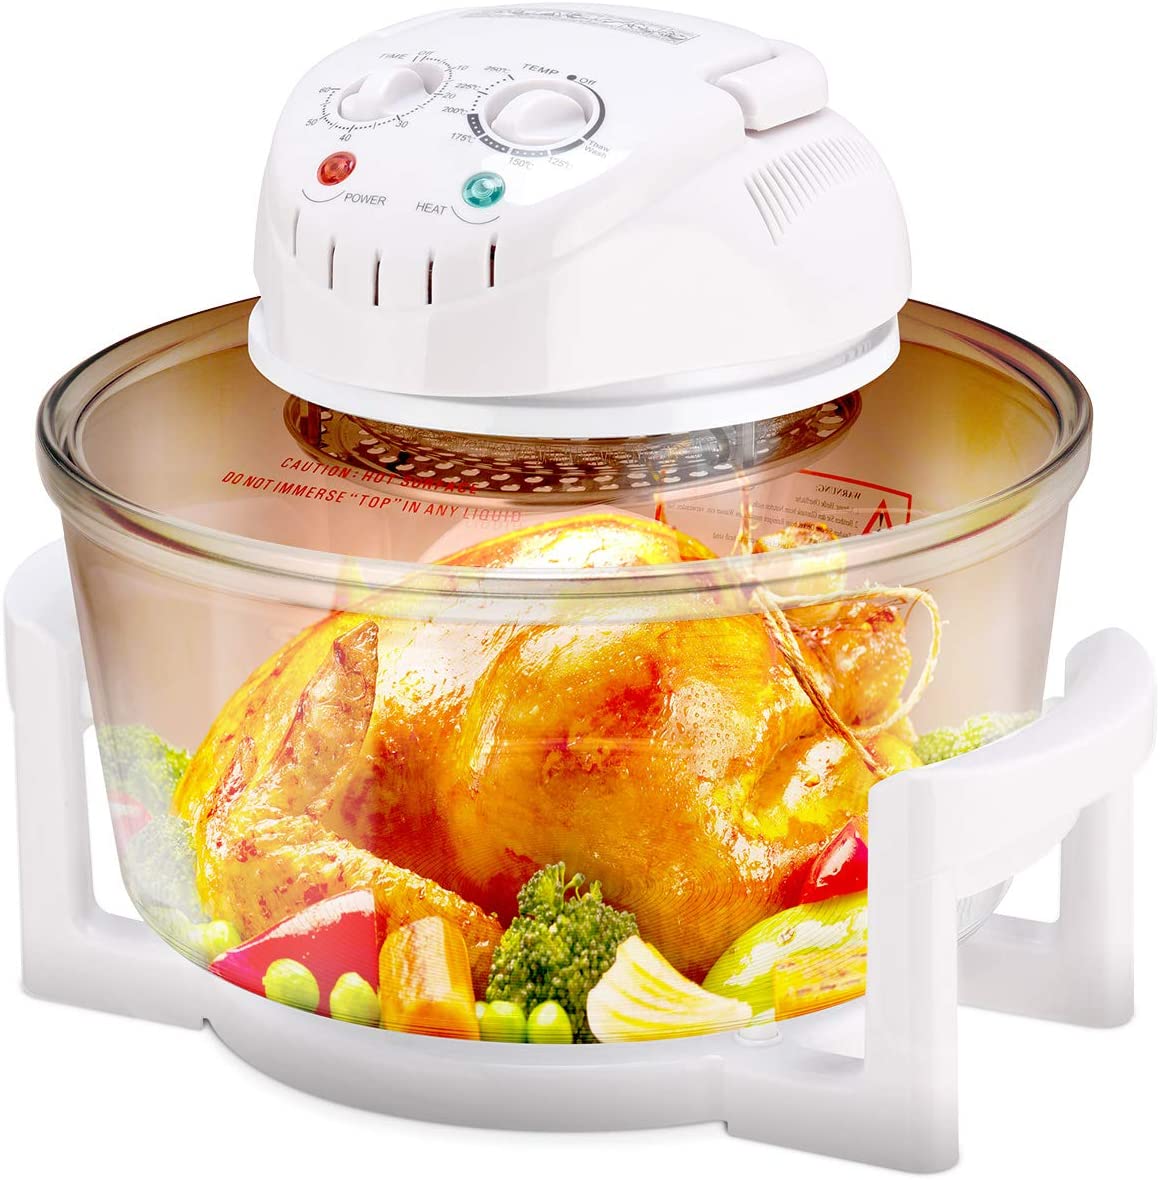 COSTWAY Halogen Oven Hot Air Oven Halogen Oven Hot Air Grill with Extension Ring 17L / 1400W / Timer / 65°C - 250°C